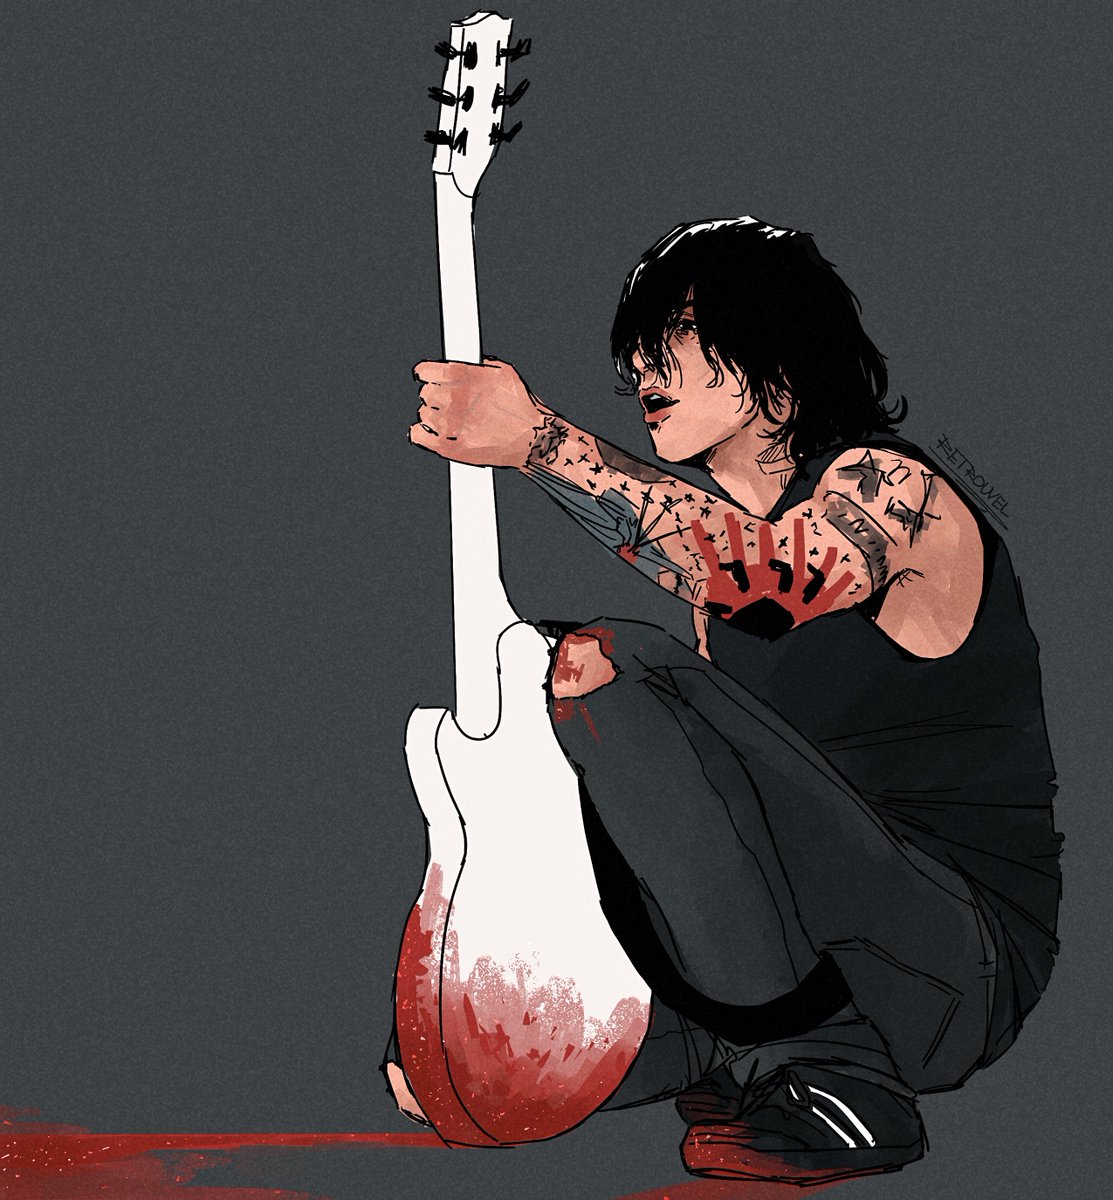 Frank Iero and sparkly blood anyone? 